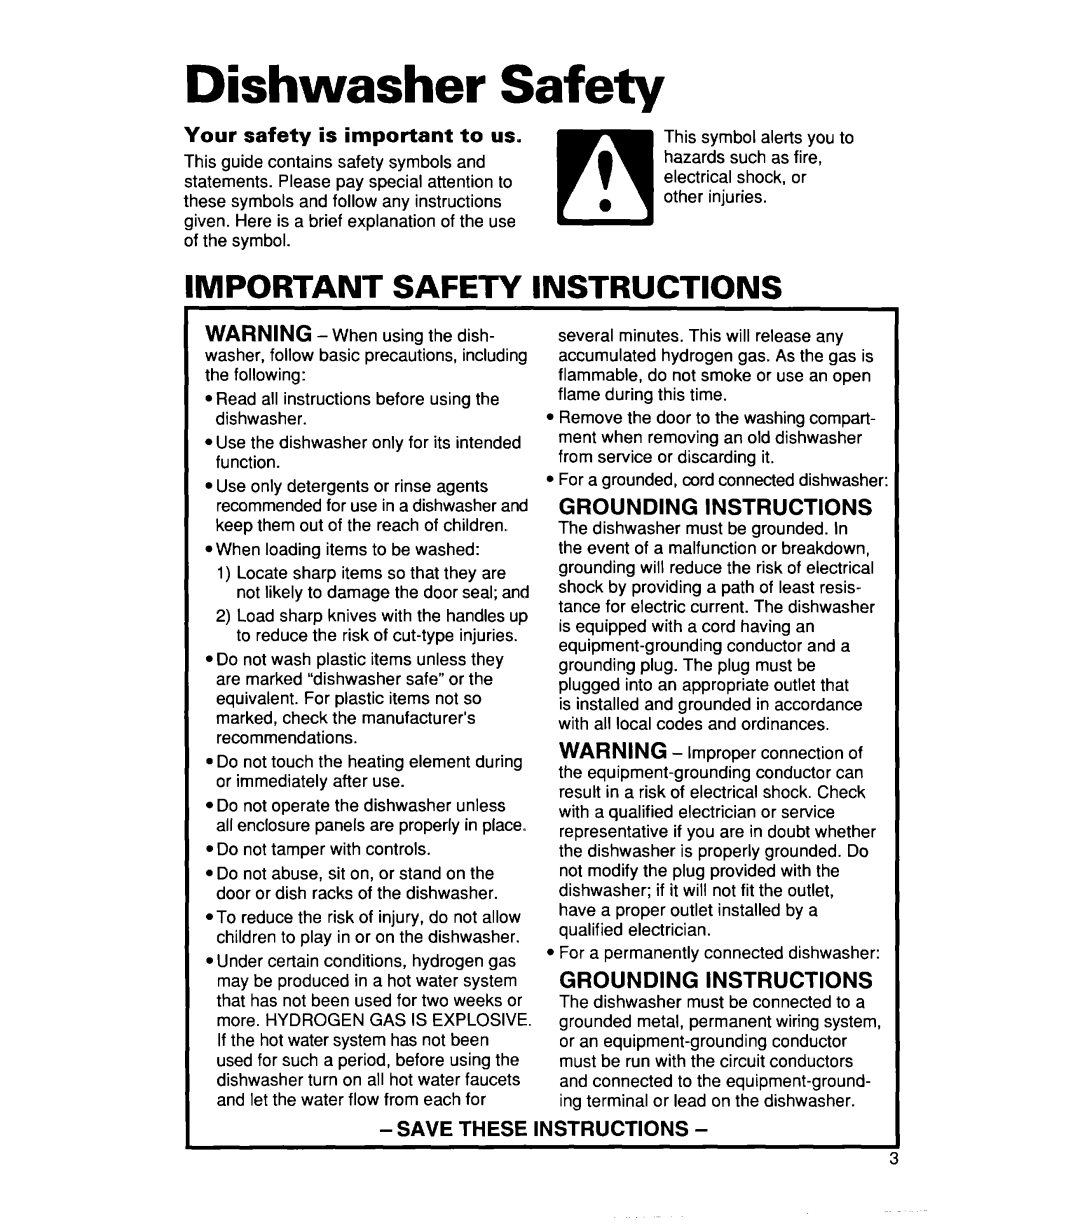 Whirlpool Series 400, 806, 830 warranty Important Safety Instructions, Grounding Instructions, Savethese Instructions 